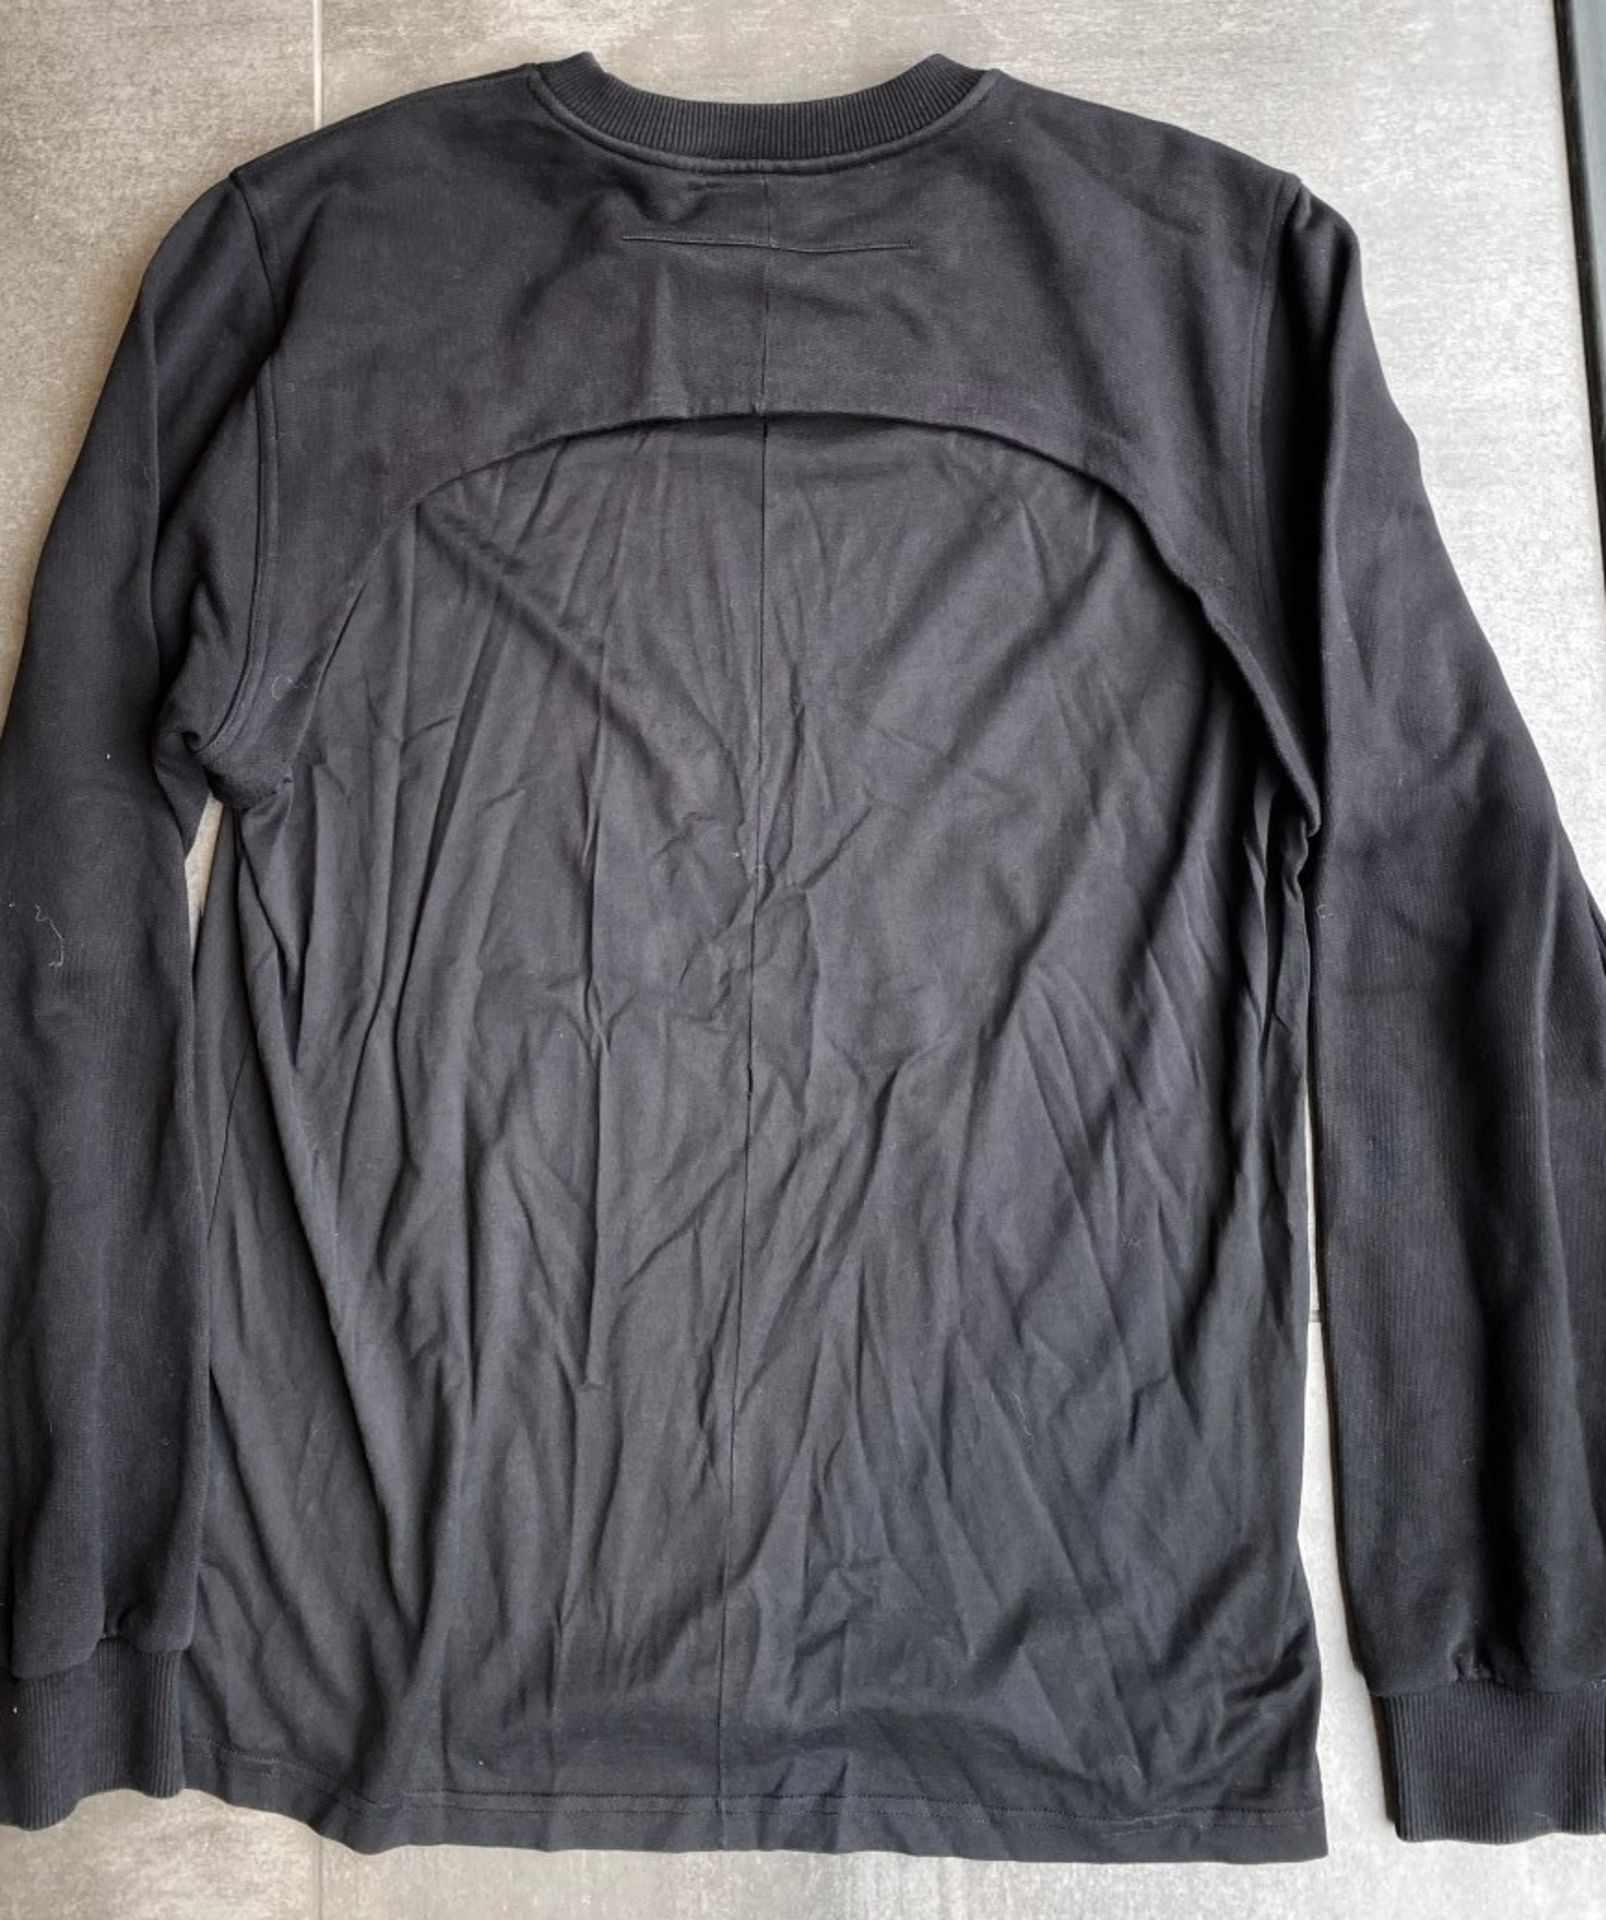 1 x Men's Genuine Givenchy Sweatshirt Top In Black - Size: Medium - Preowned In Very Good - Image 2 of 7